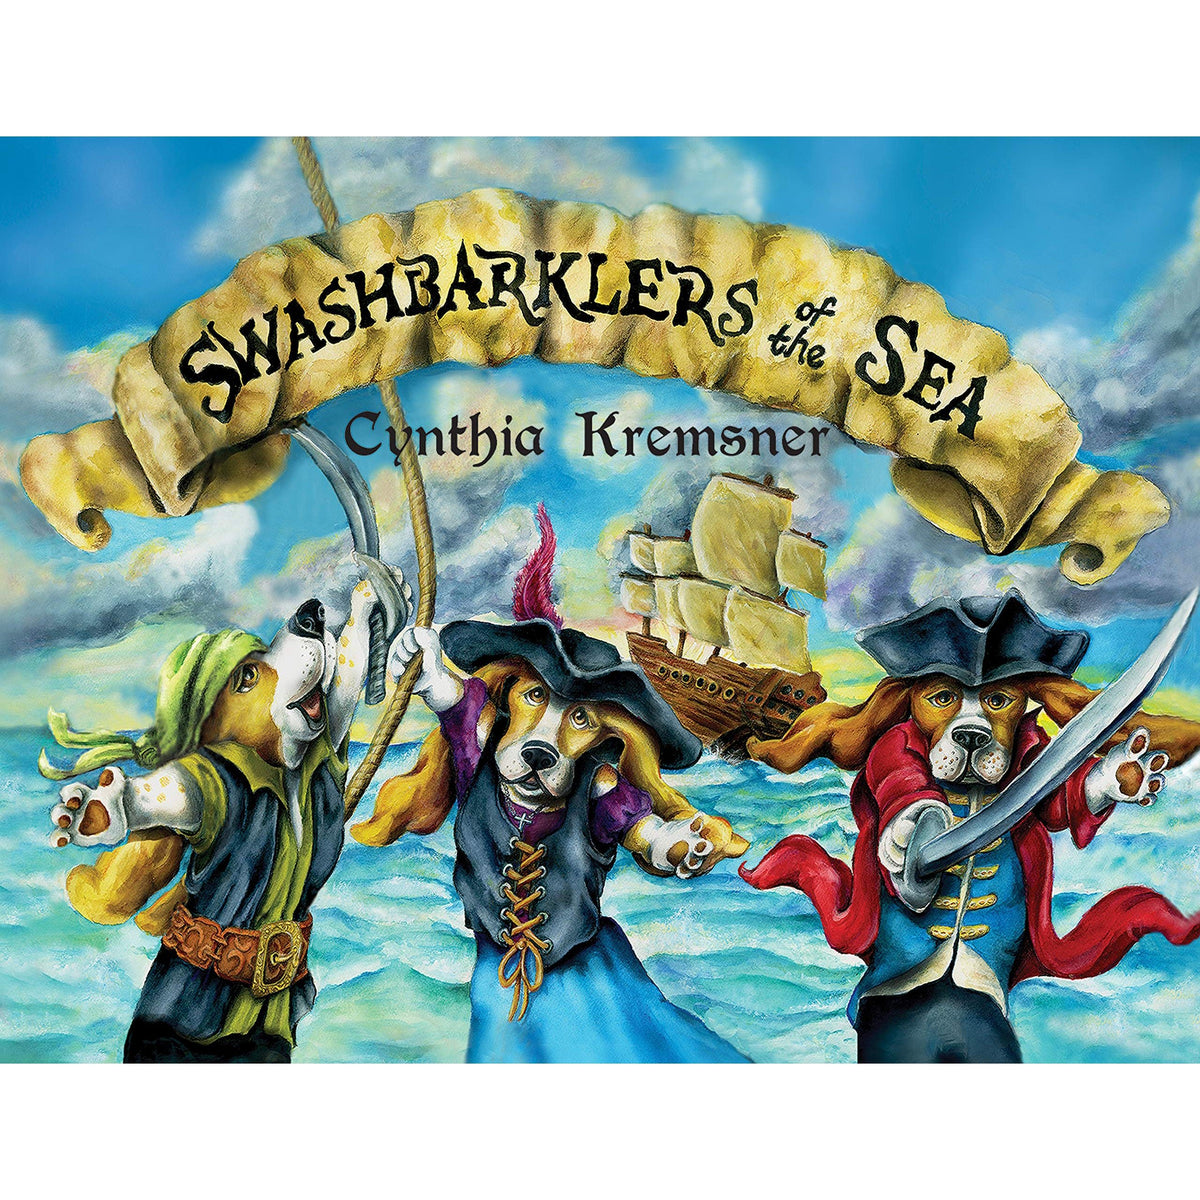 Sea-dogs and swashbucklers: why we all love pirates